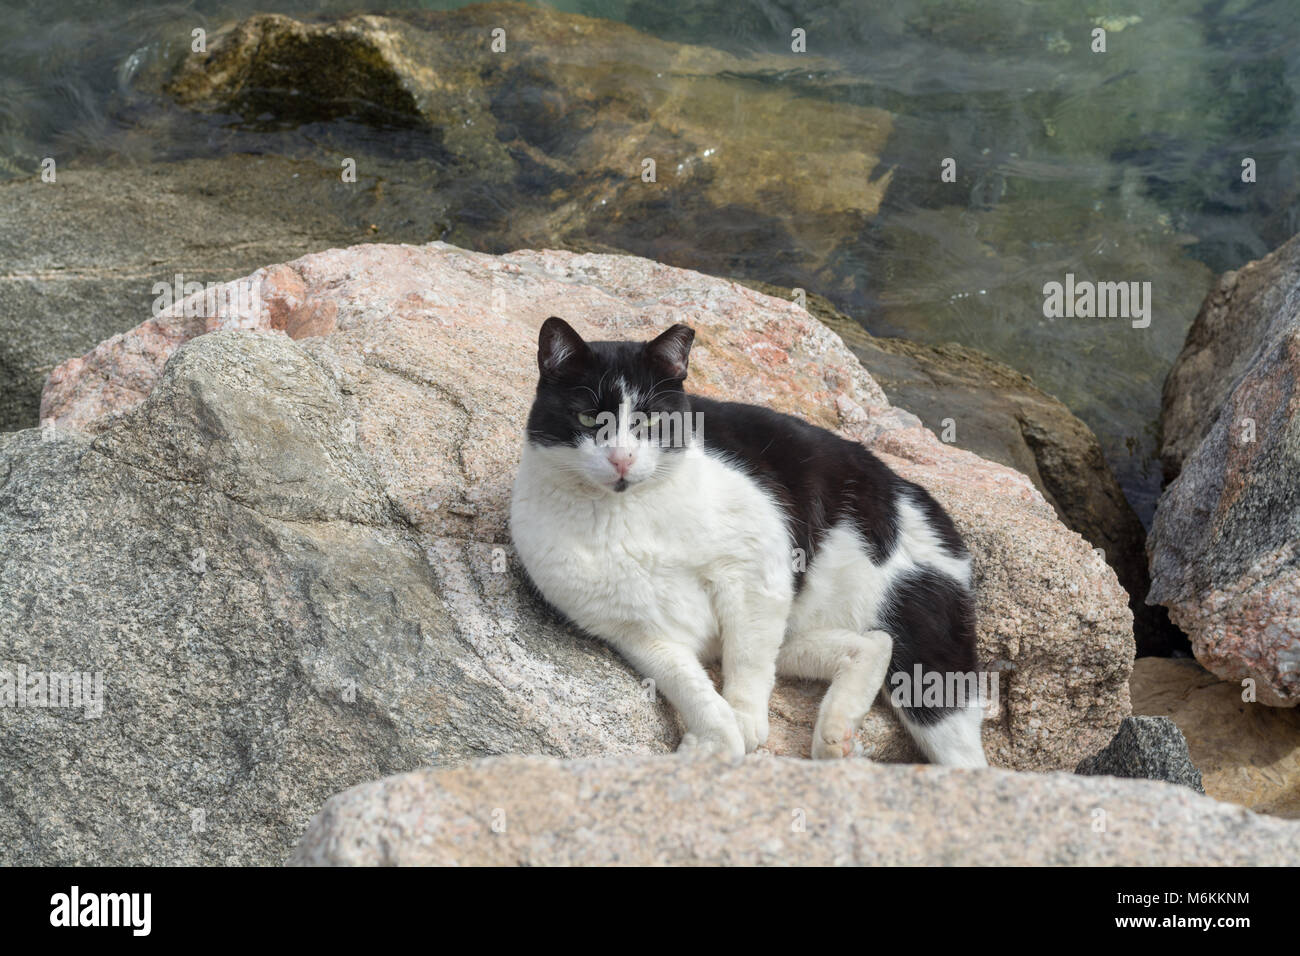 Cats of Eilat, Israel. Many cats leave on streets and beaches of Eilat, they protect the city from rats and snakes Stock Photo